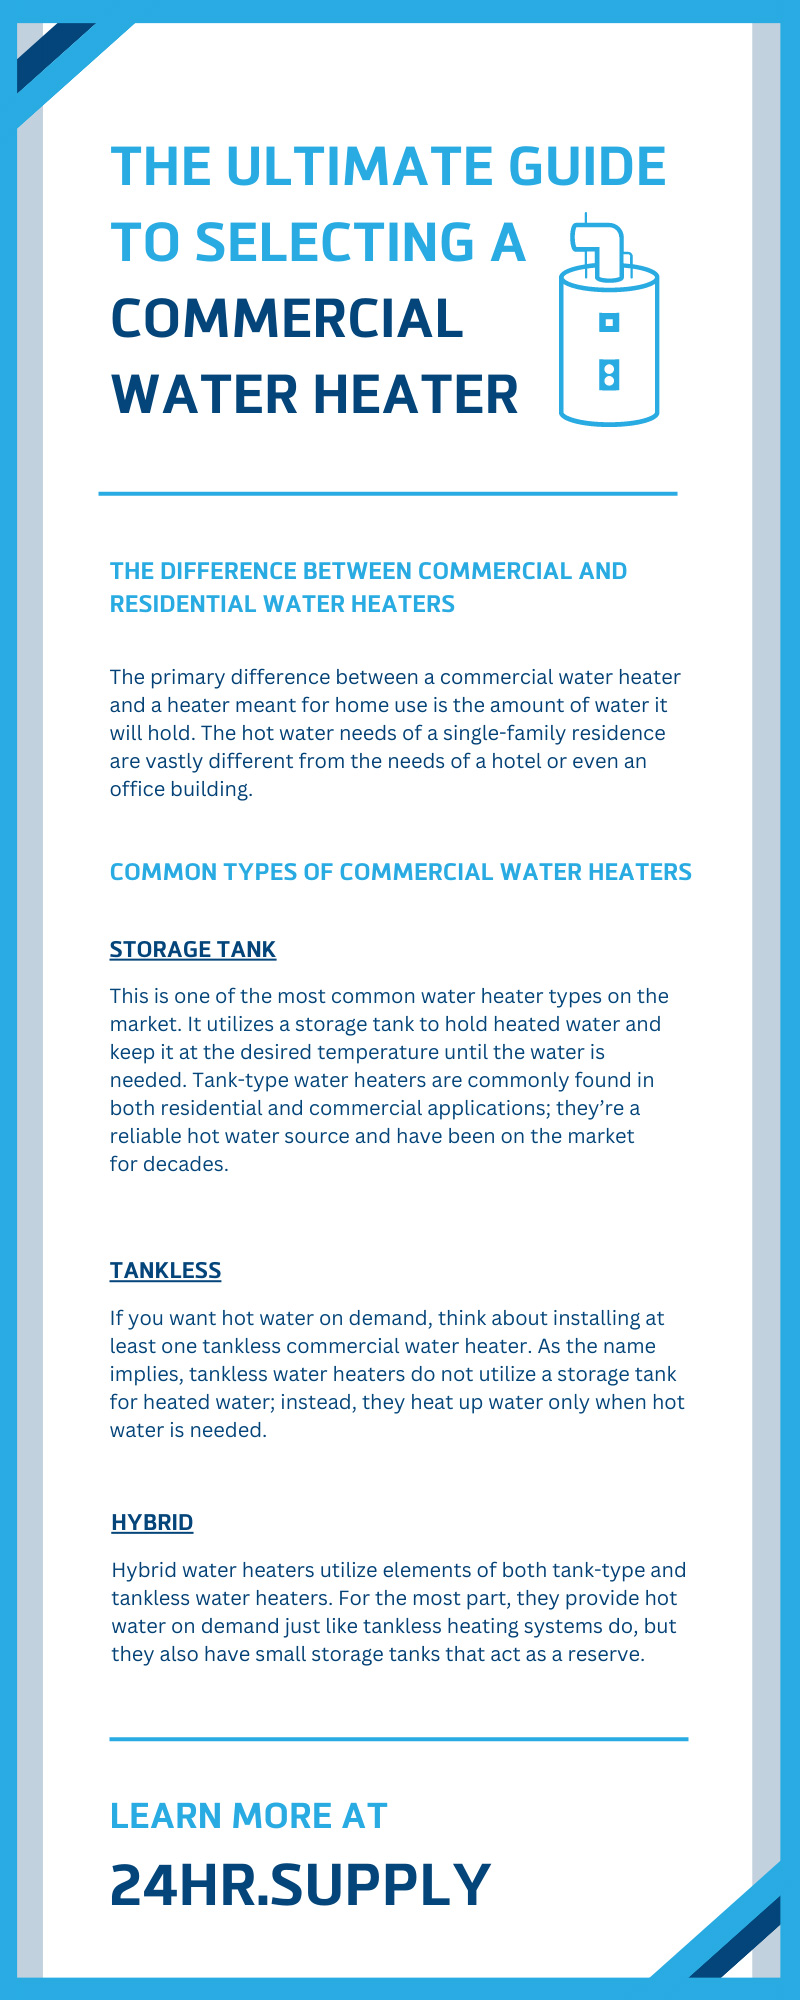 The Ultimate Guide to Selecting a Commercial Water Heater